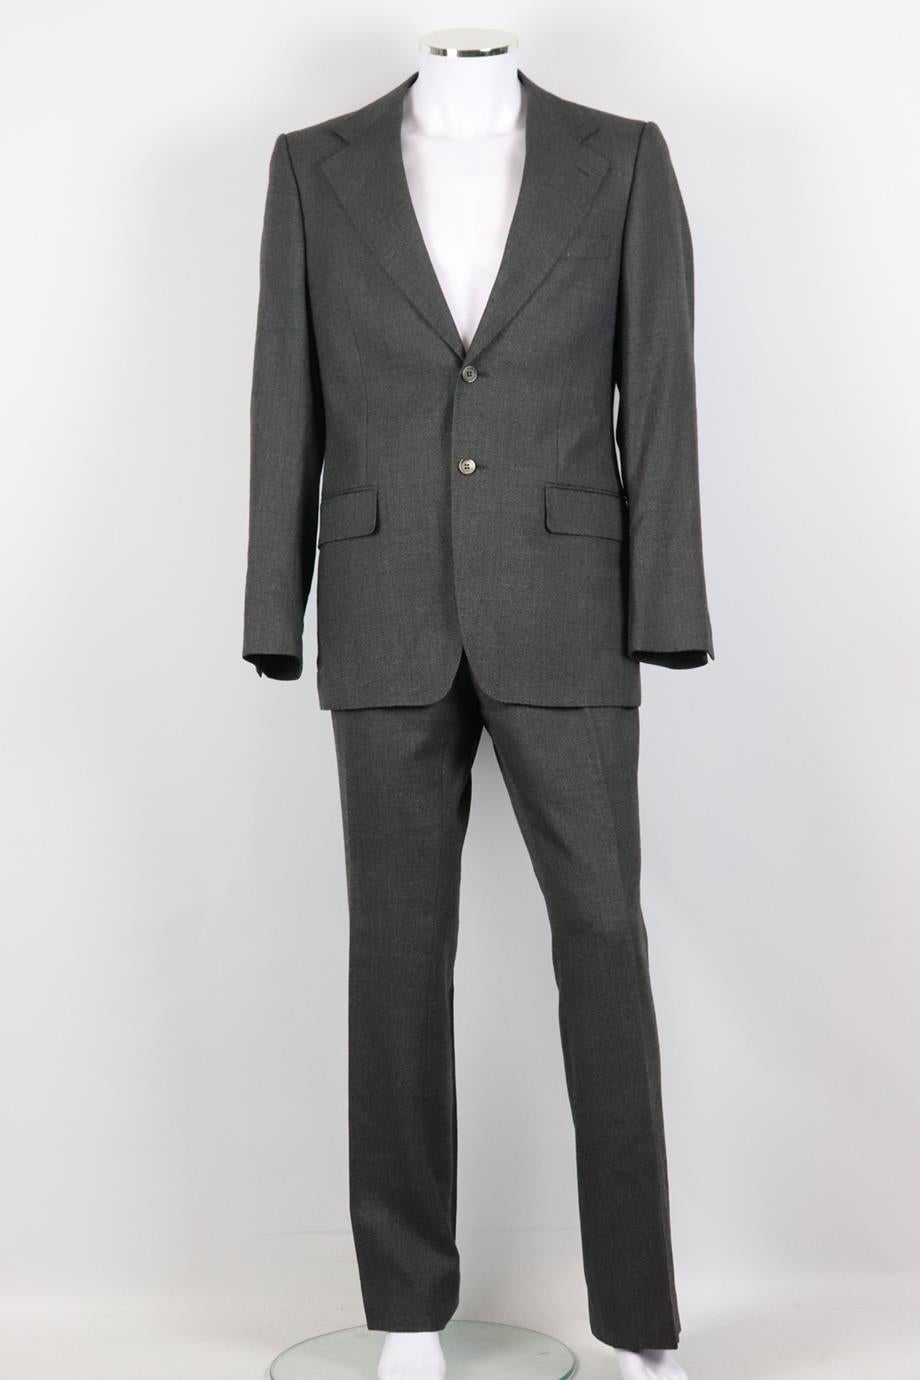 Yves Saint Laurent men's wool two piece suit. Grey. Long sleeve, v-neck. Button fastening at front, hook, eye and zip fastening at front. Jacket: 100% Wool; lining: 100% silk. Pants: 100% viscose. Size: IT 50 (Large, EU 50, UK/US Chest 40) Jacket: